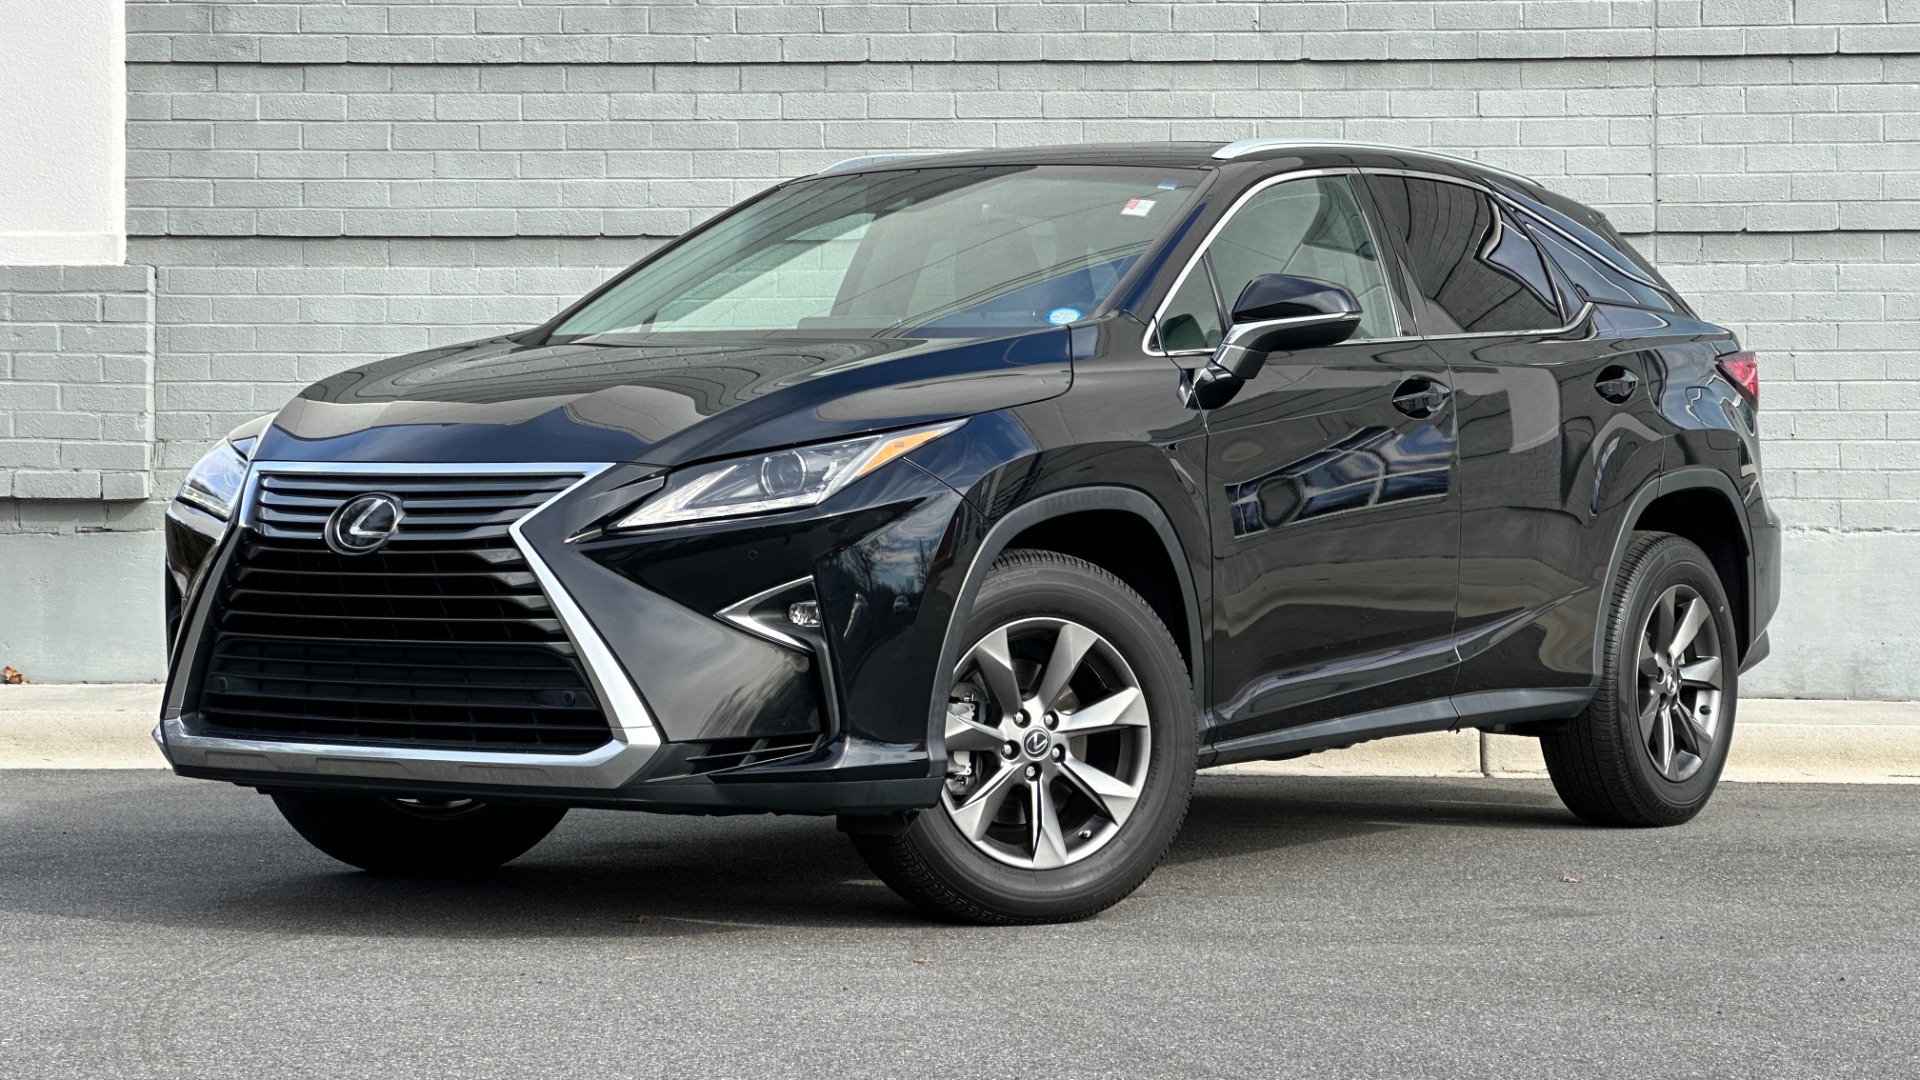 Used 2018 Lexus RX 350 3.5L V6 / PREMIUM / BLIND SPOT MONITOR / VENT STS / REARVIEW for sale $40,995 at Formula Imports in Charlotte NC 28227 1